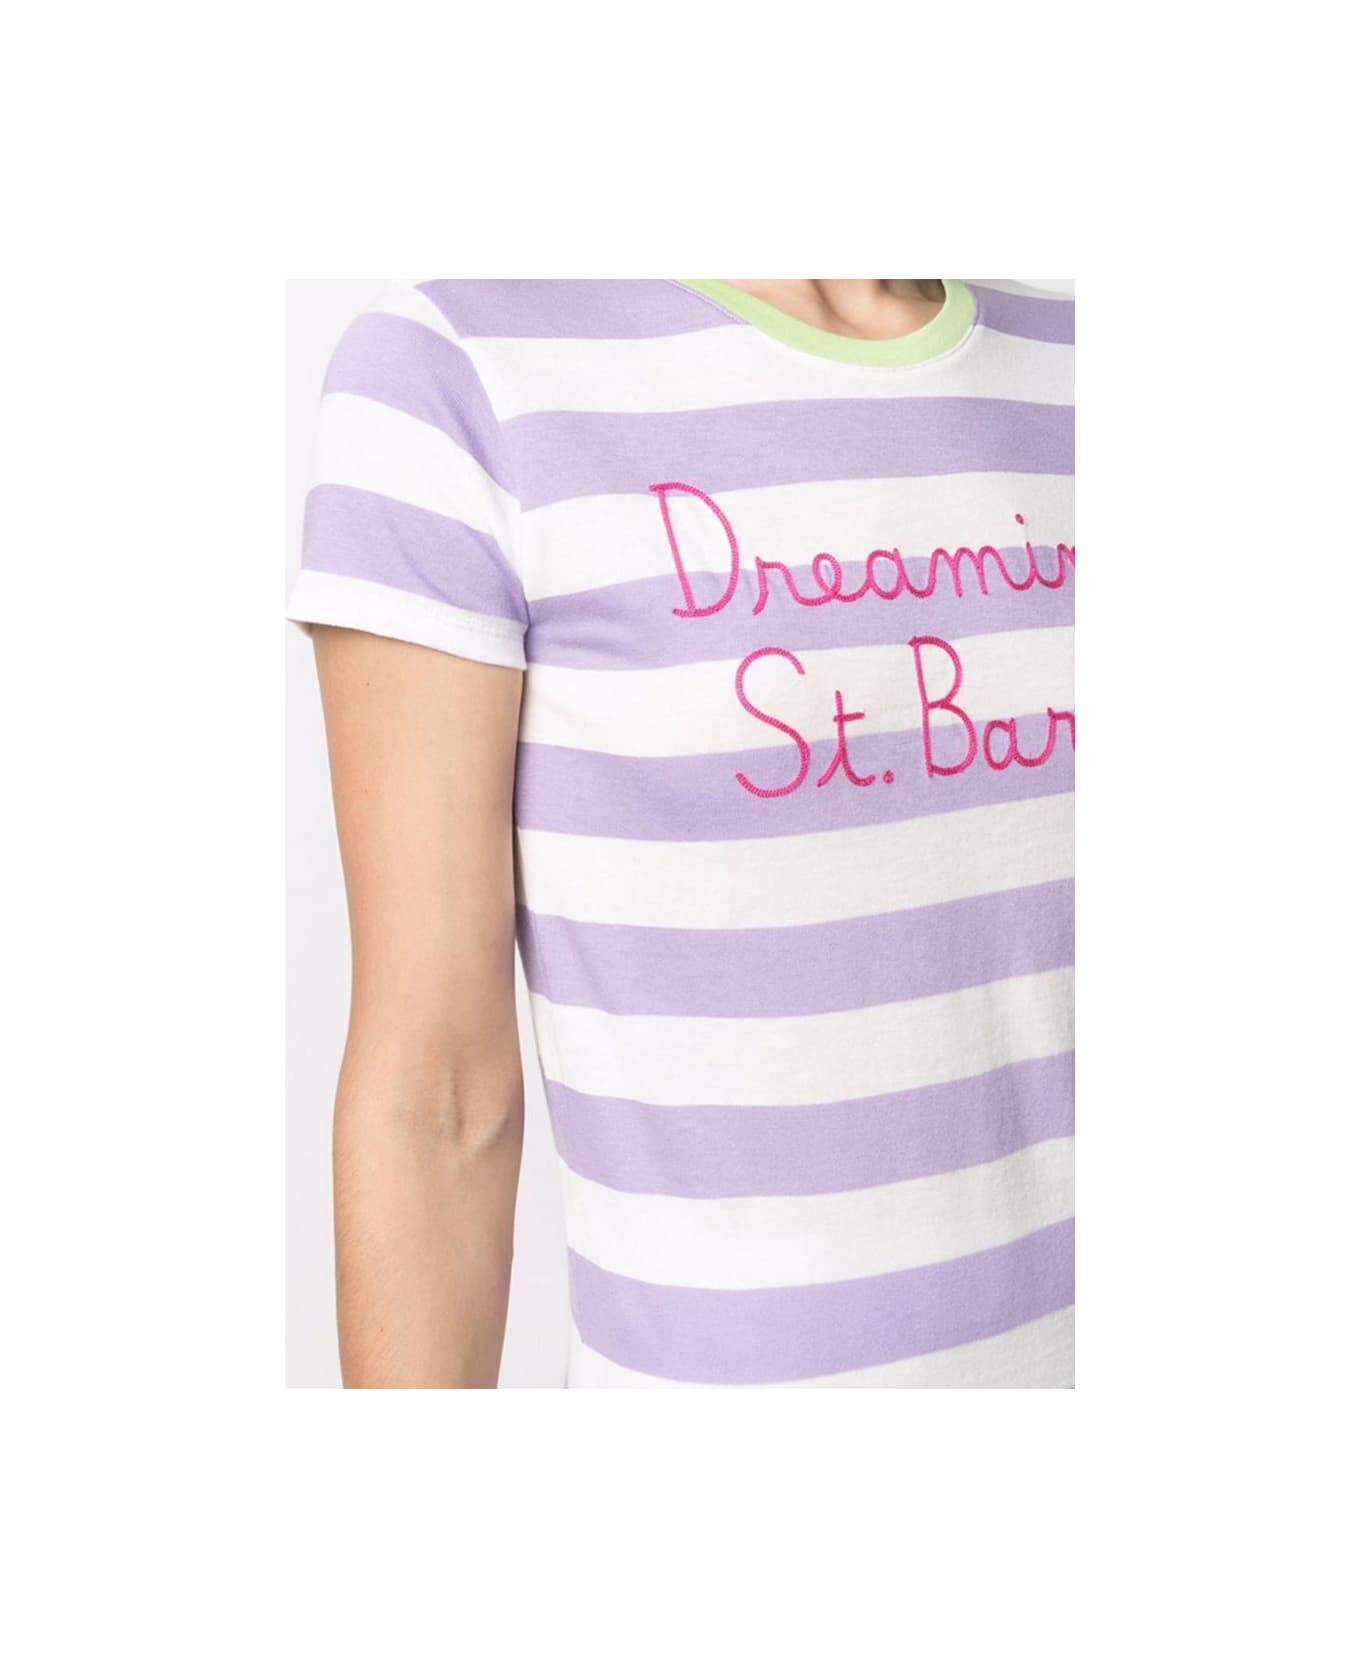 MC2 Saint Barth Lilac And White Striped T-shirt With Embroidered St. Barth Is My Dream - PURPLE